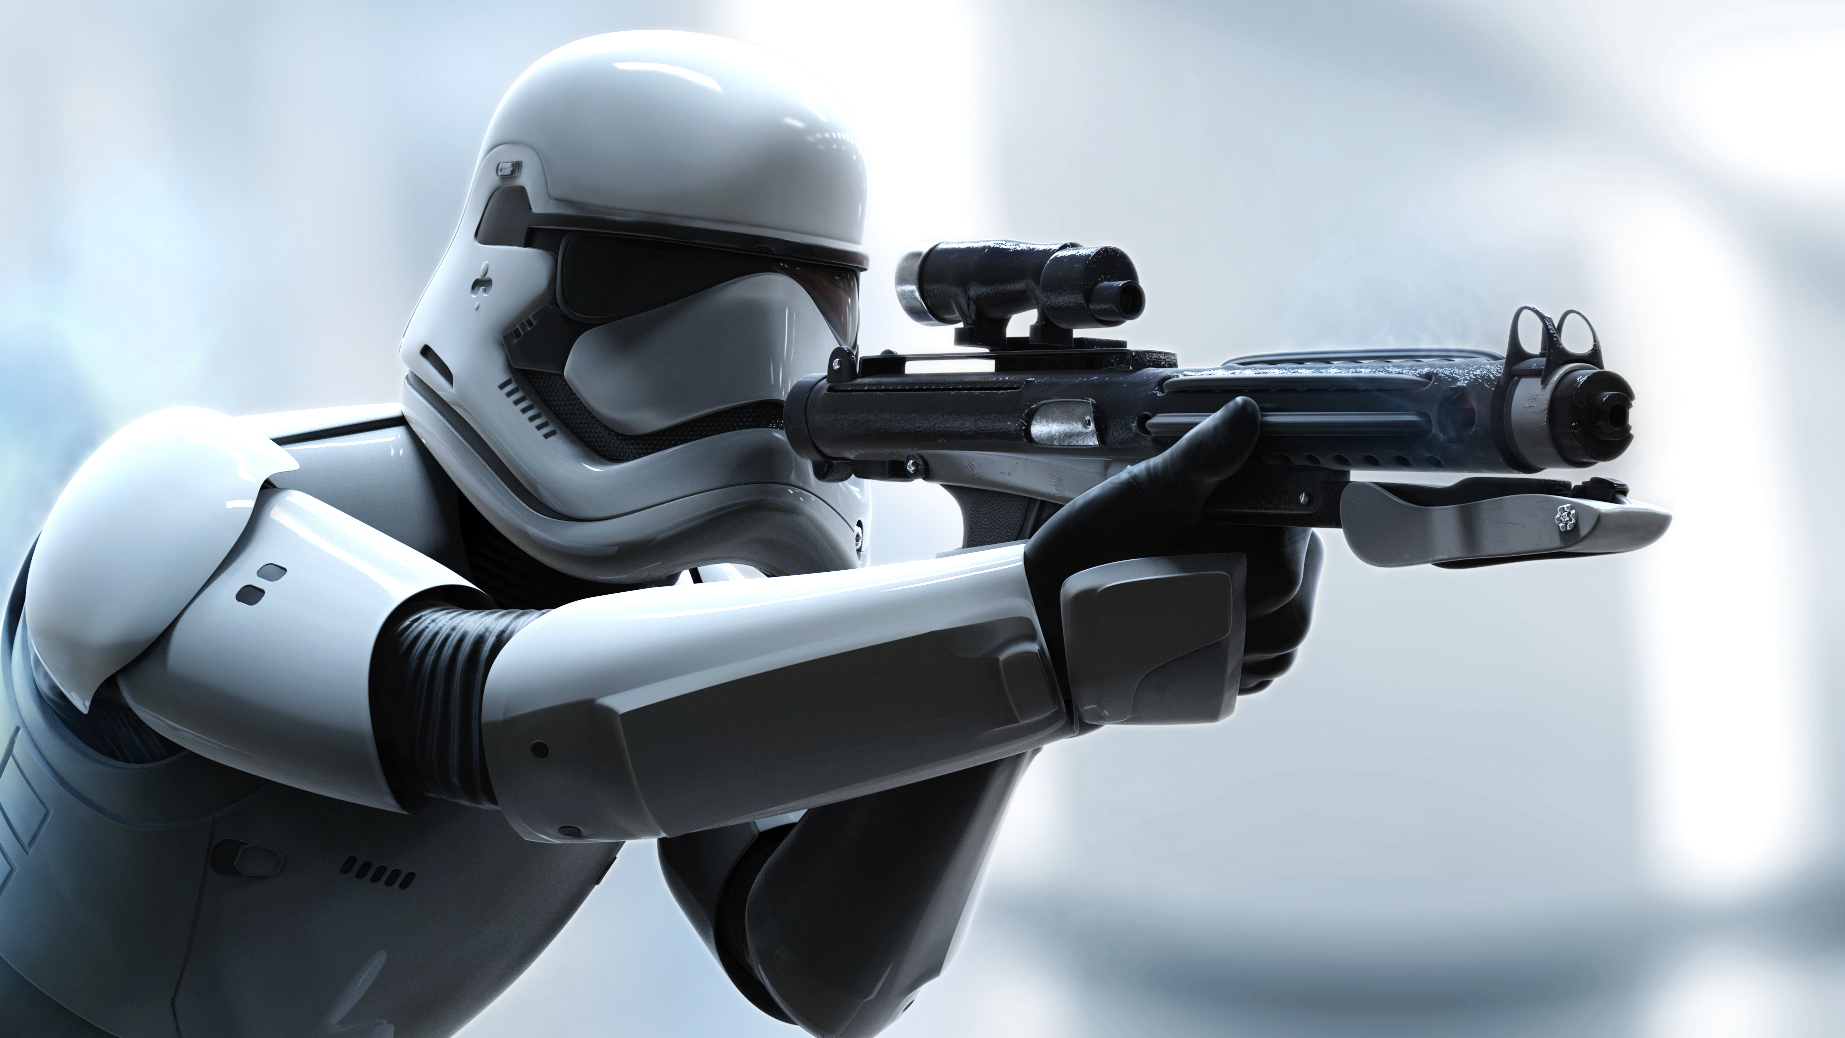 First Order Stormtrooper Wallpapers